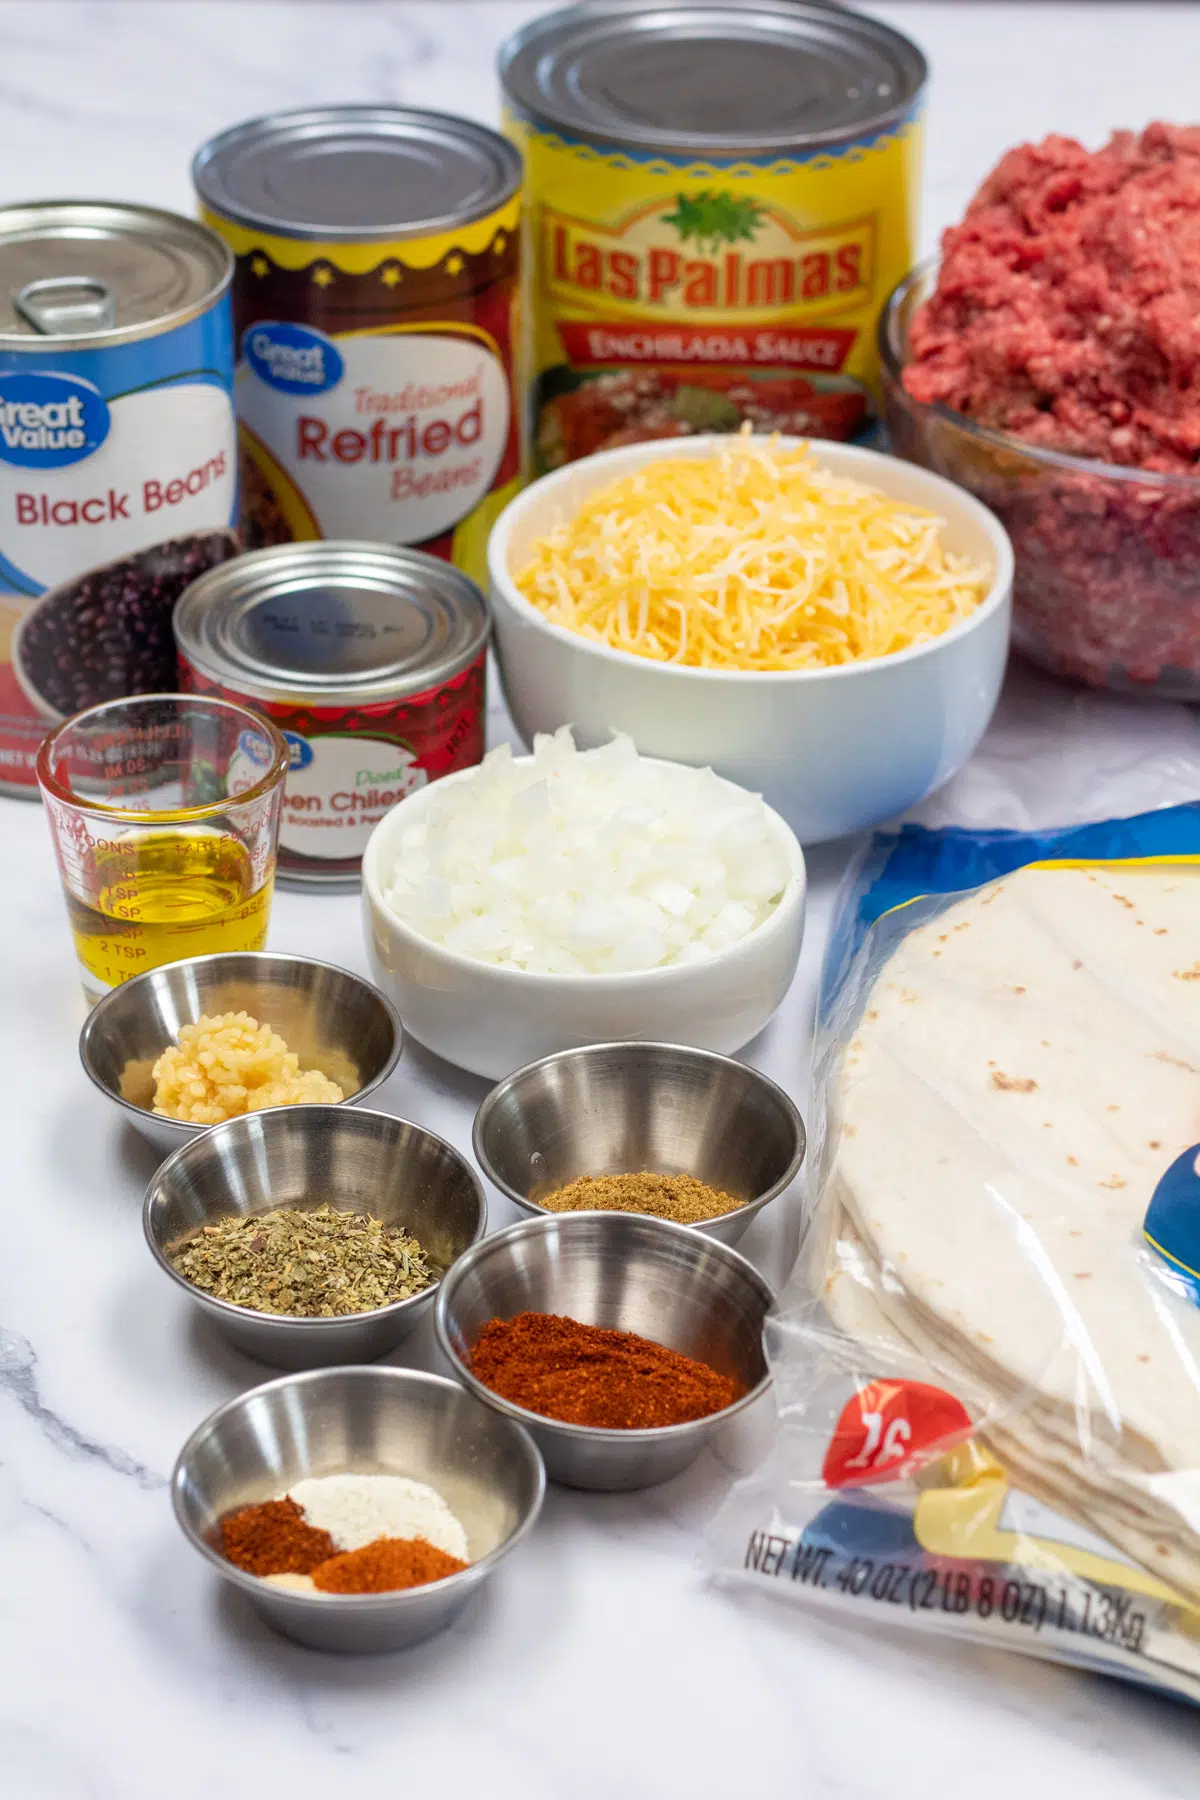 Photo showing ingredients needed for beef enchiladas.